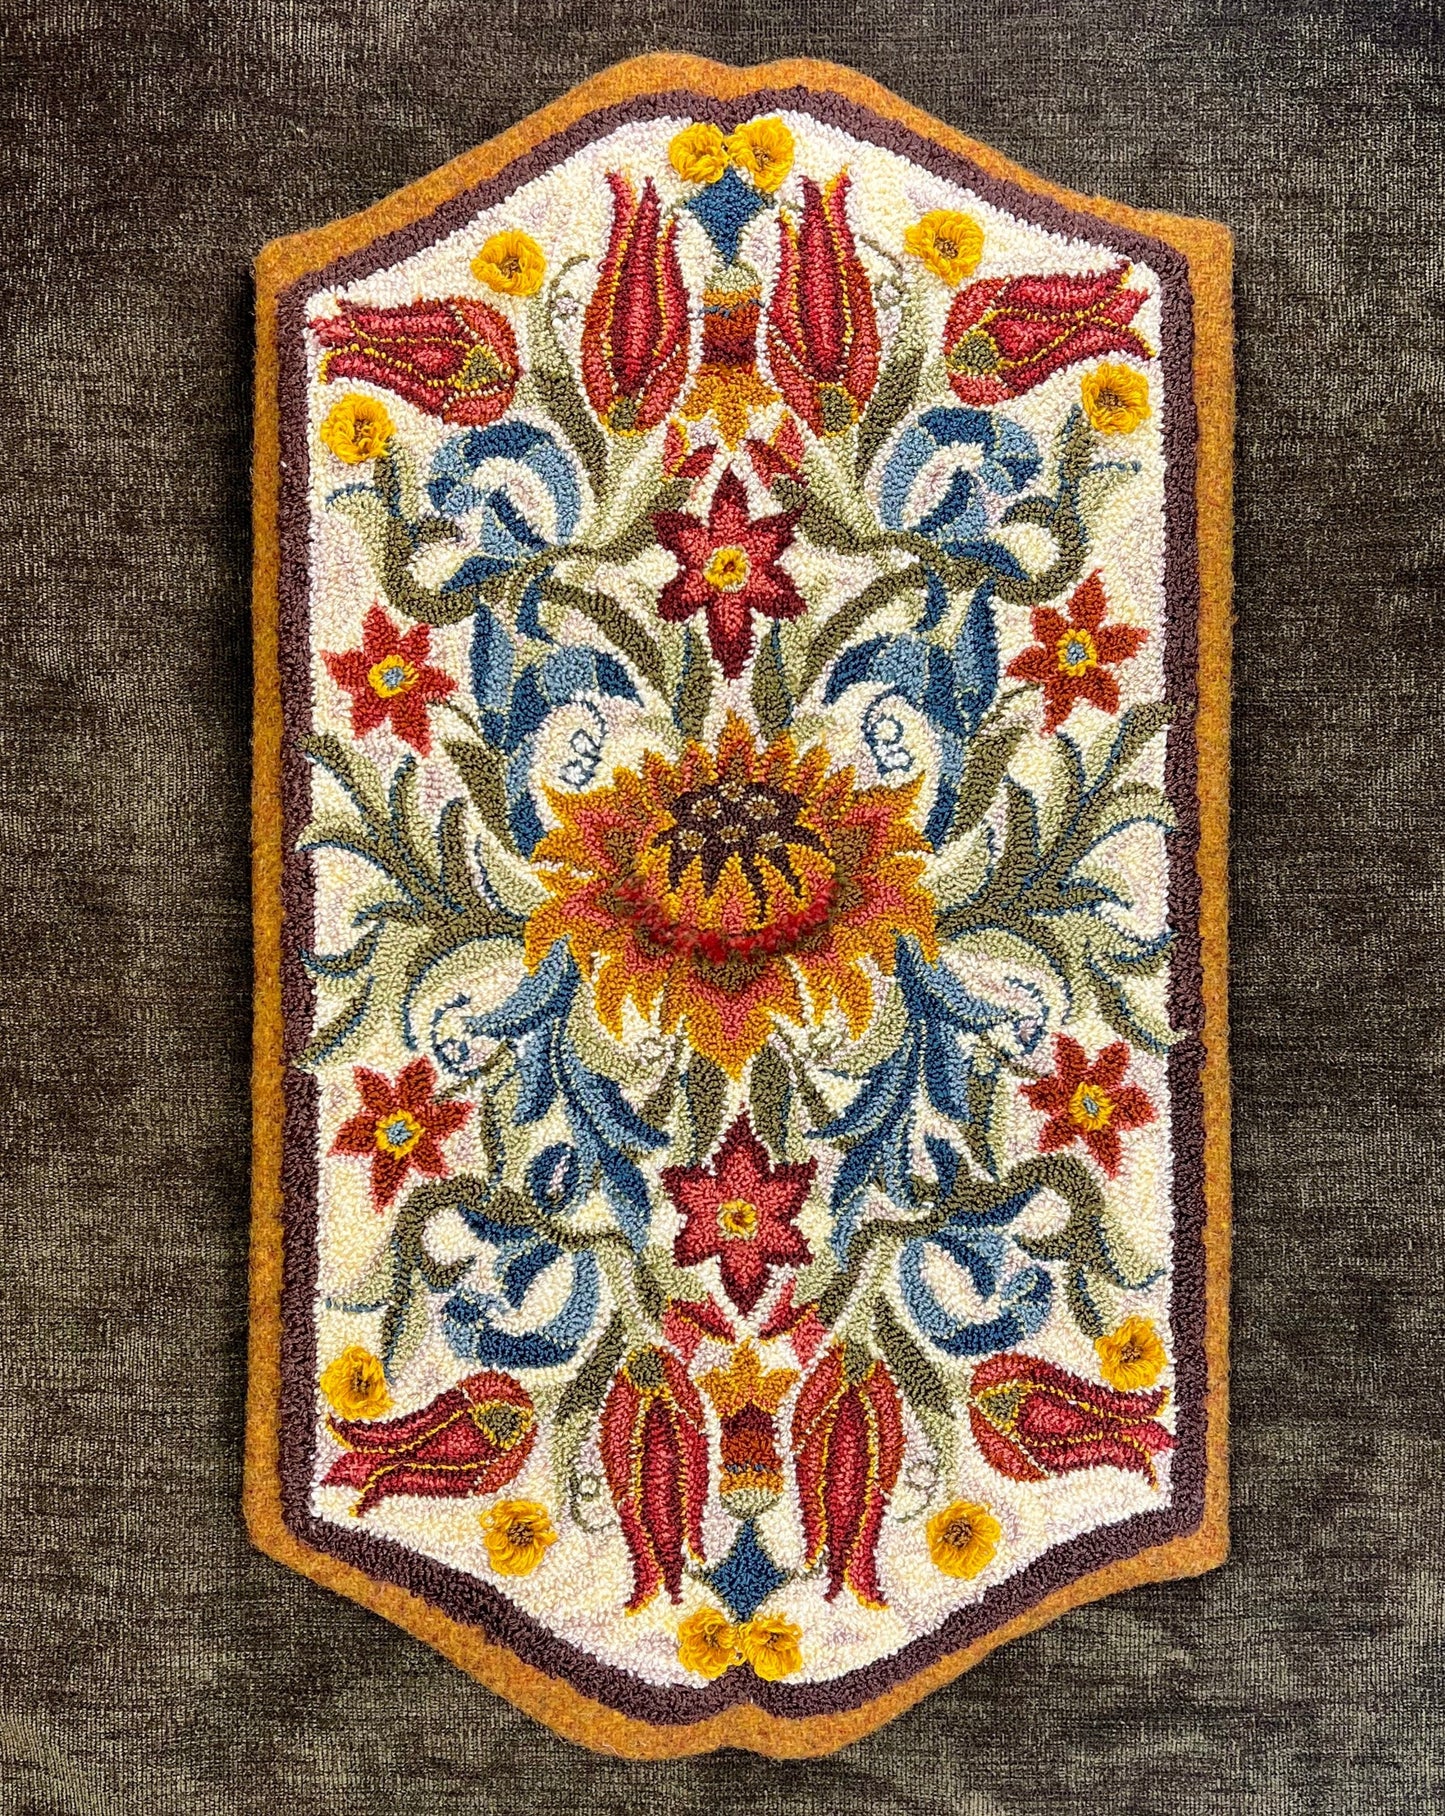  Delight- Paper Rug Hooking or Rug Punch Needle Pattern by Orphaned Wool. This is a timeless floral design inspired by the Arts and Crafts movement. The curved edges create an elegance to the design. This is a paper pattern that is formatted to be enlarged. You can choose what size Delight pattern you wish to create with this paper pattern. Copyright 2022- Kelly Kanyok / Orphaned Wool.